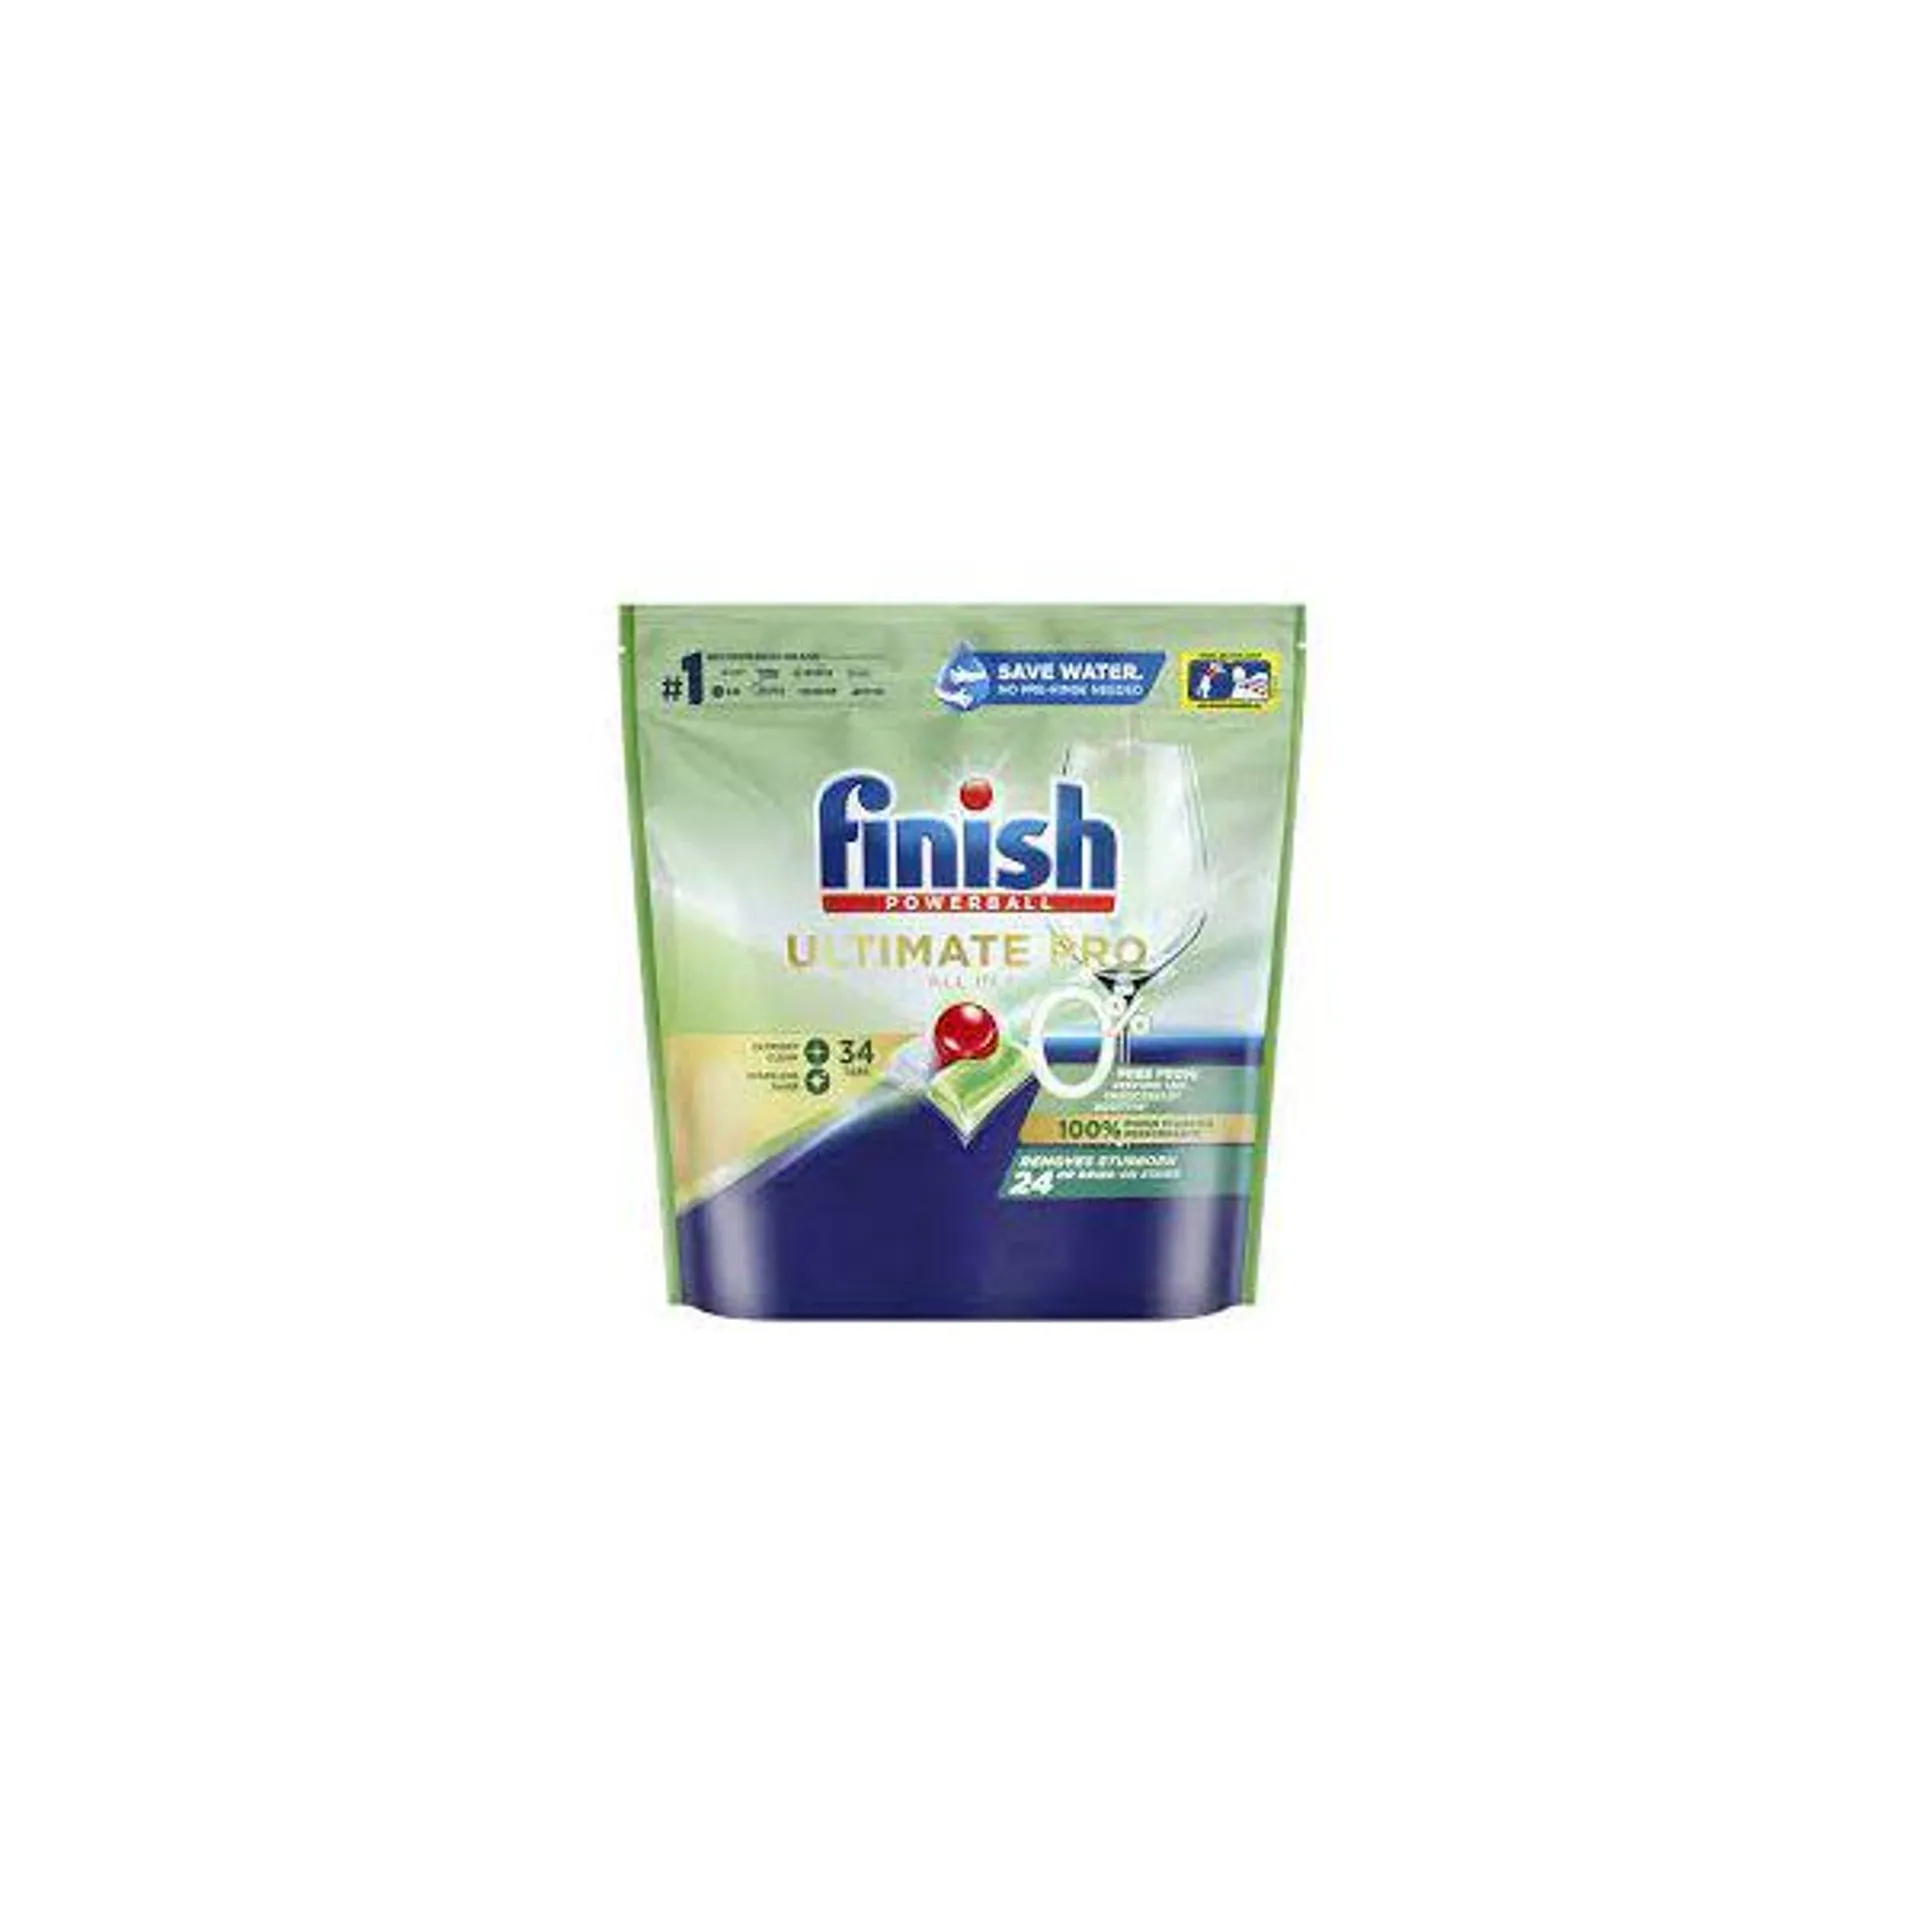 Finish Ultimate Pro Dishwasher 34 Tablets All In 1